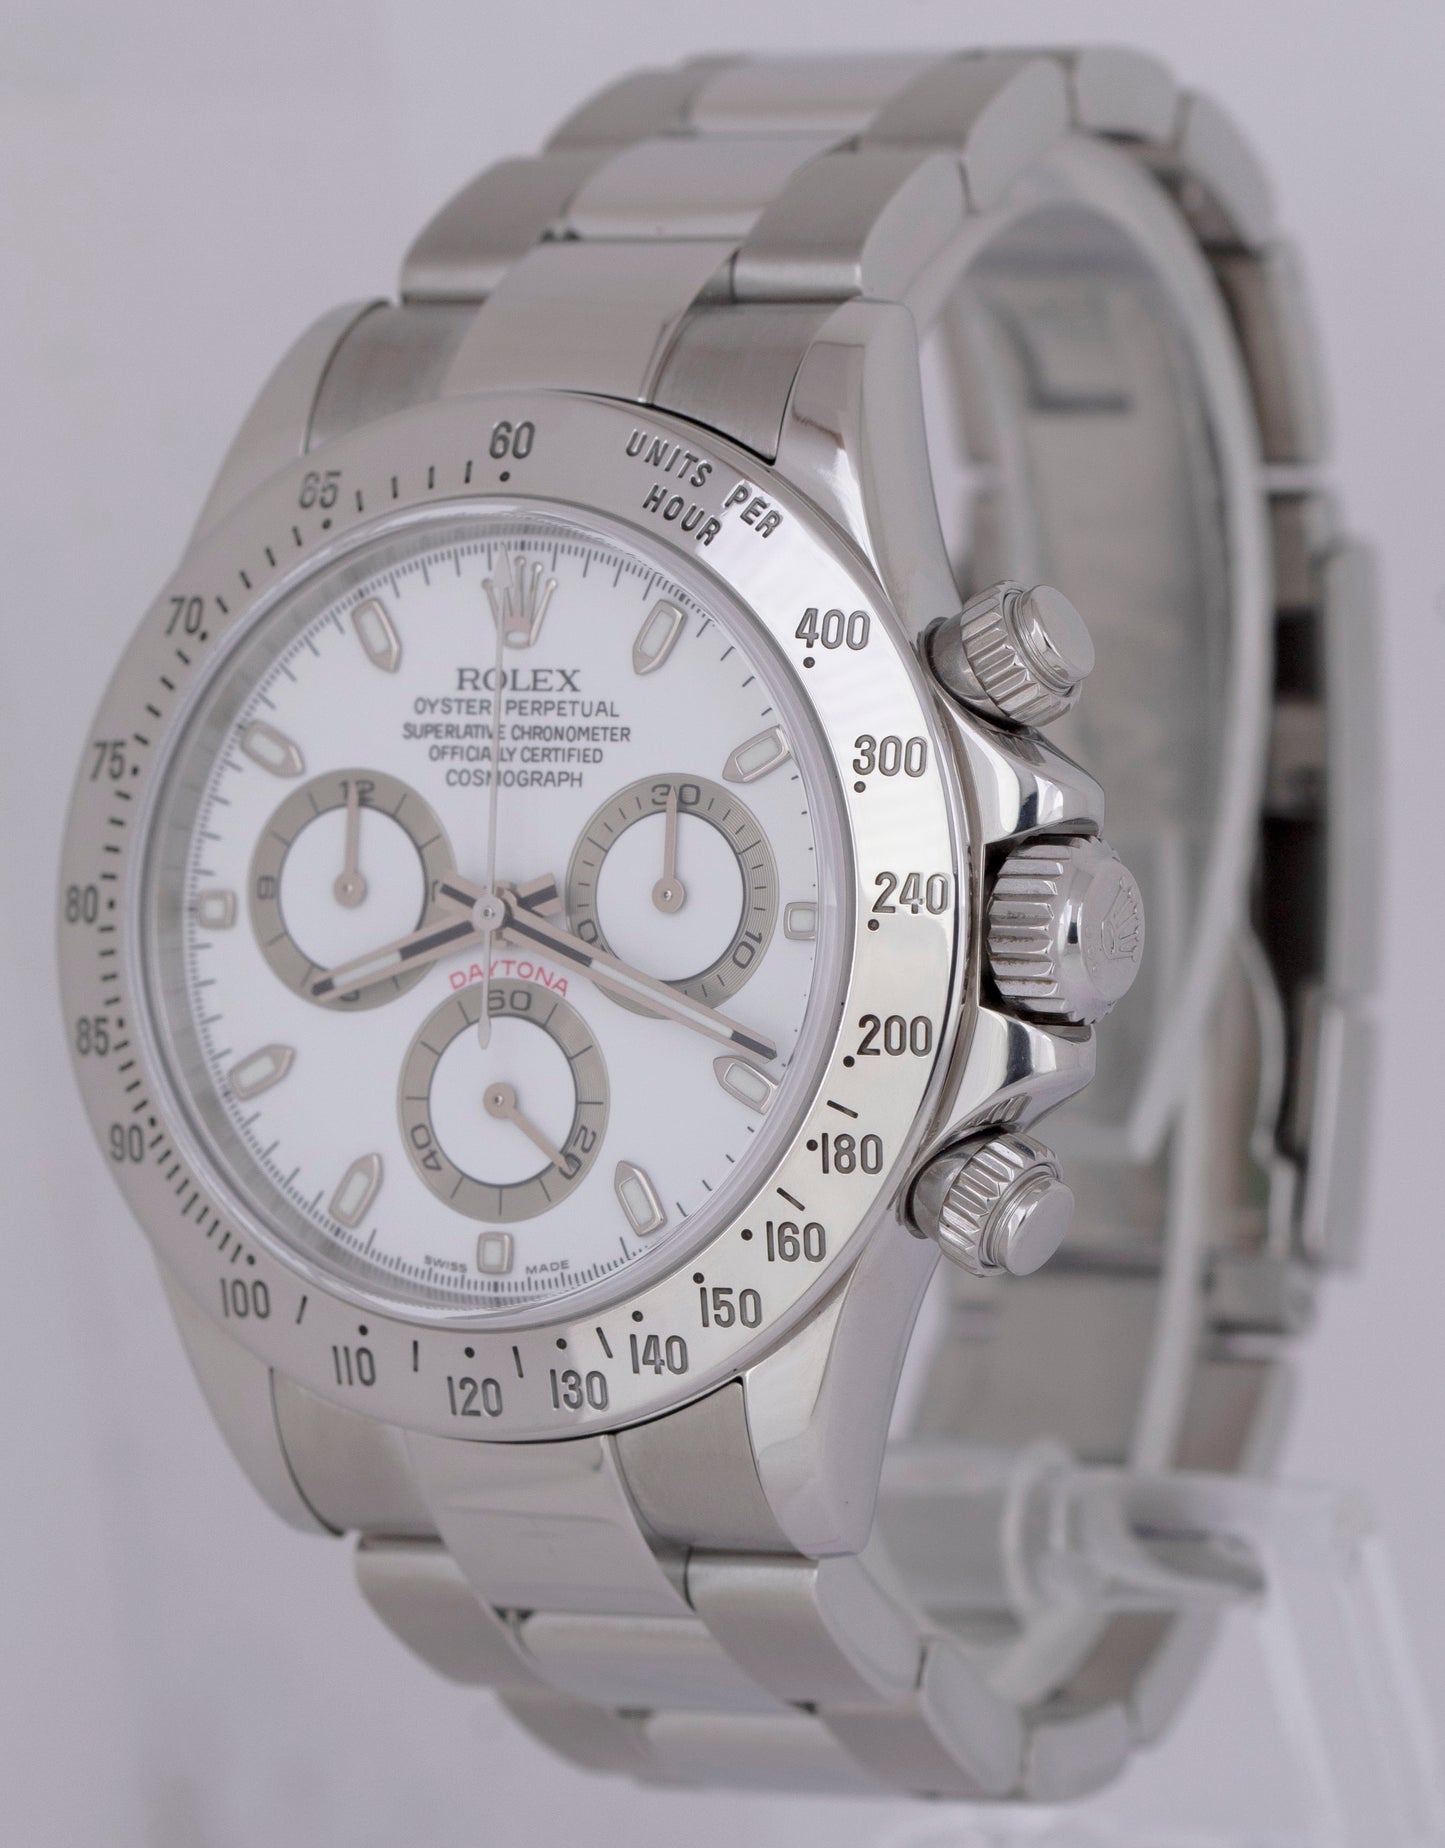 MINT PAPERS Rolex Daytona Cosmograph White 40mm 116520 Stainless Steel Watch BOX